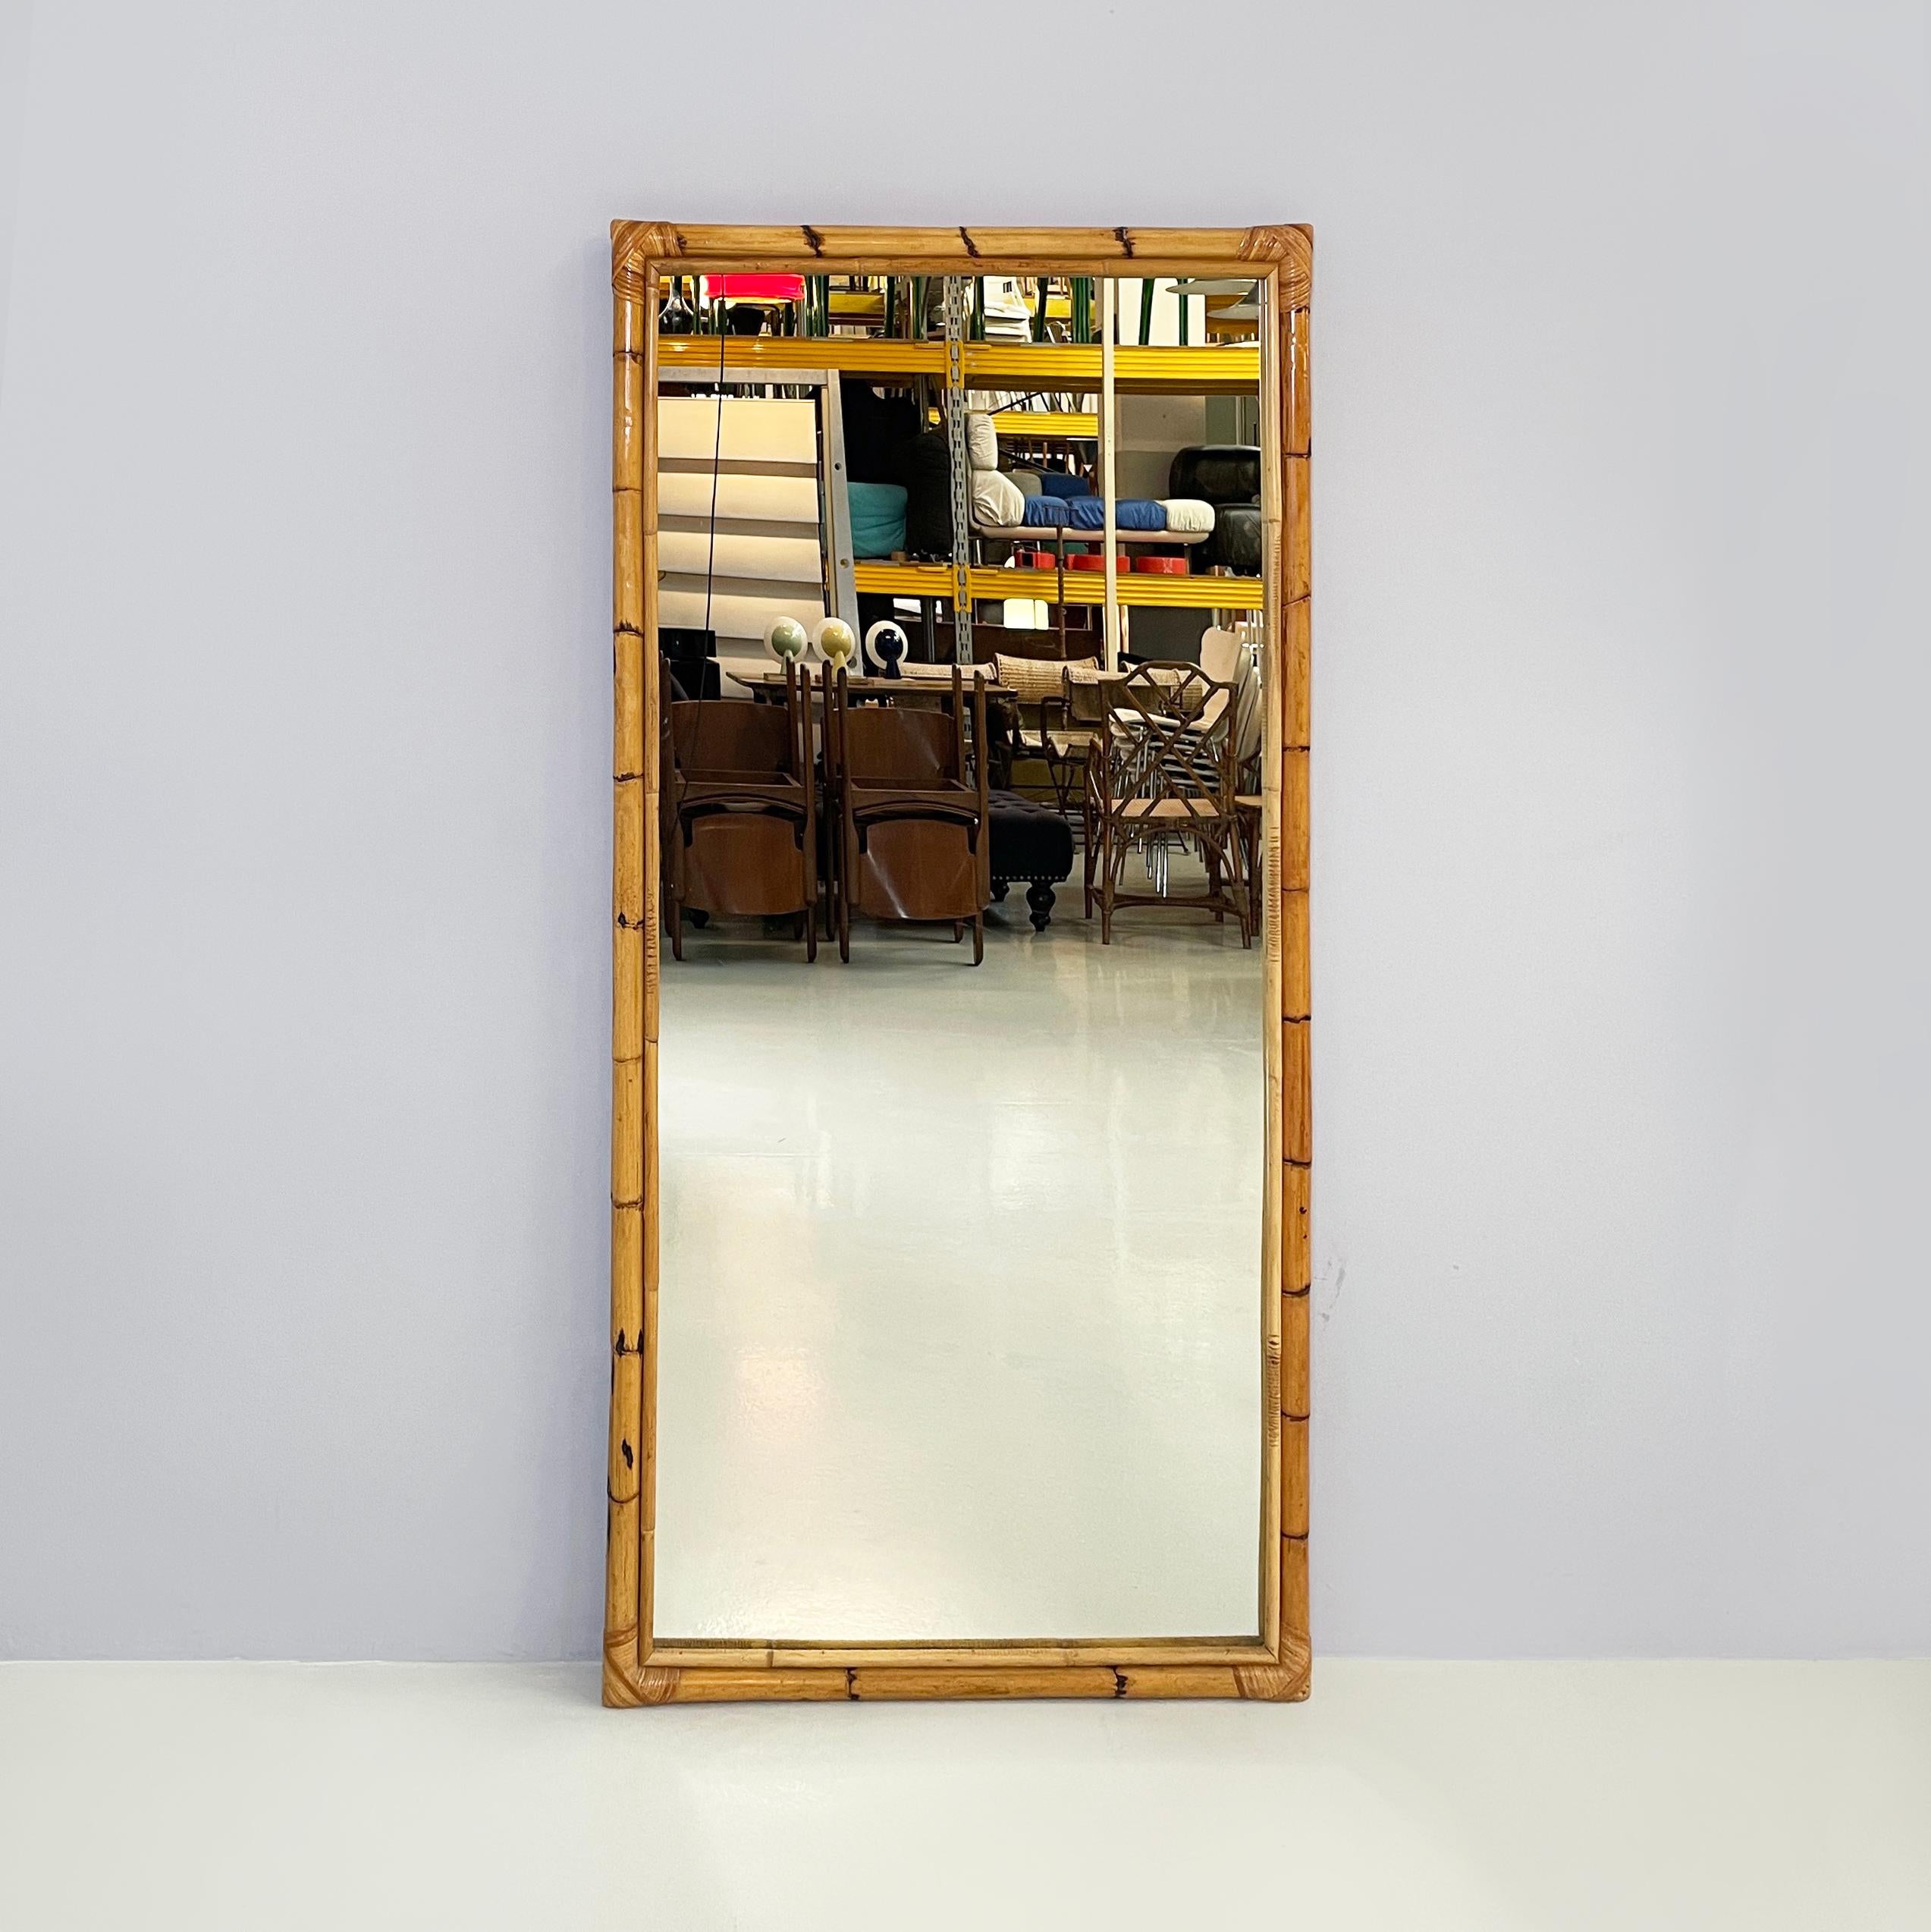 Italian mid-century modern Wall and Full-Length mirror with bamboo, 1960s
Rectangular wall mirror with frame made of bamboo strips.
1960 approx.
Good condition, light scattered marks on the rattan.
Measurements in cm 85x7x158h
the mirror is an